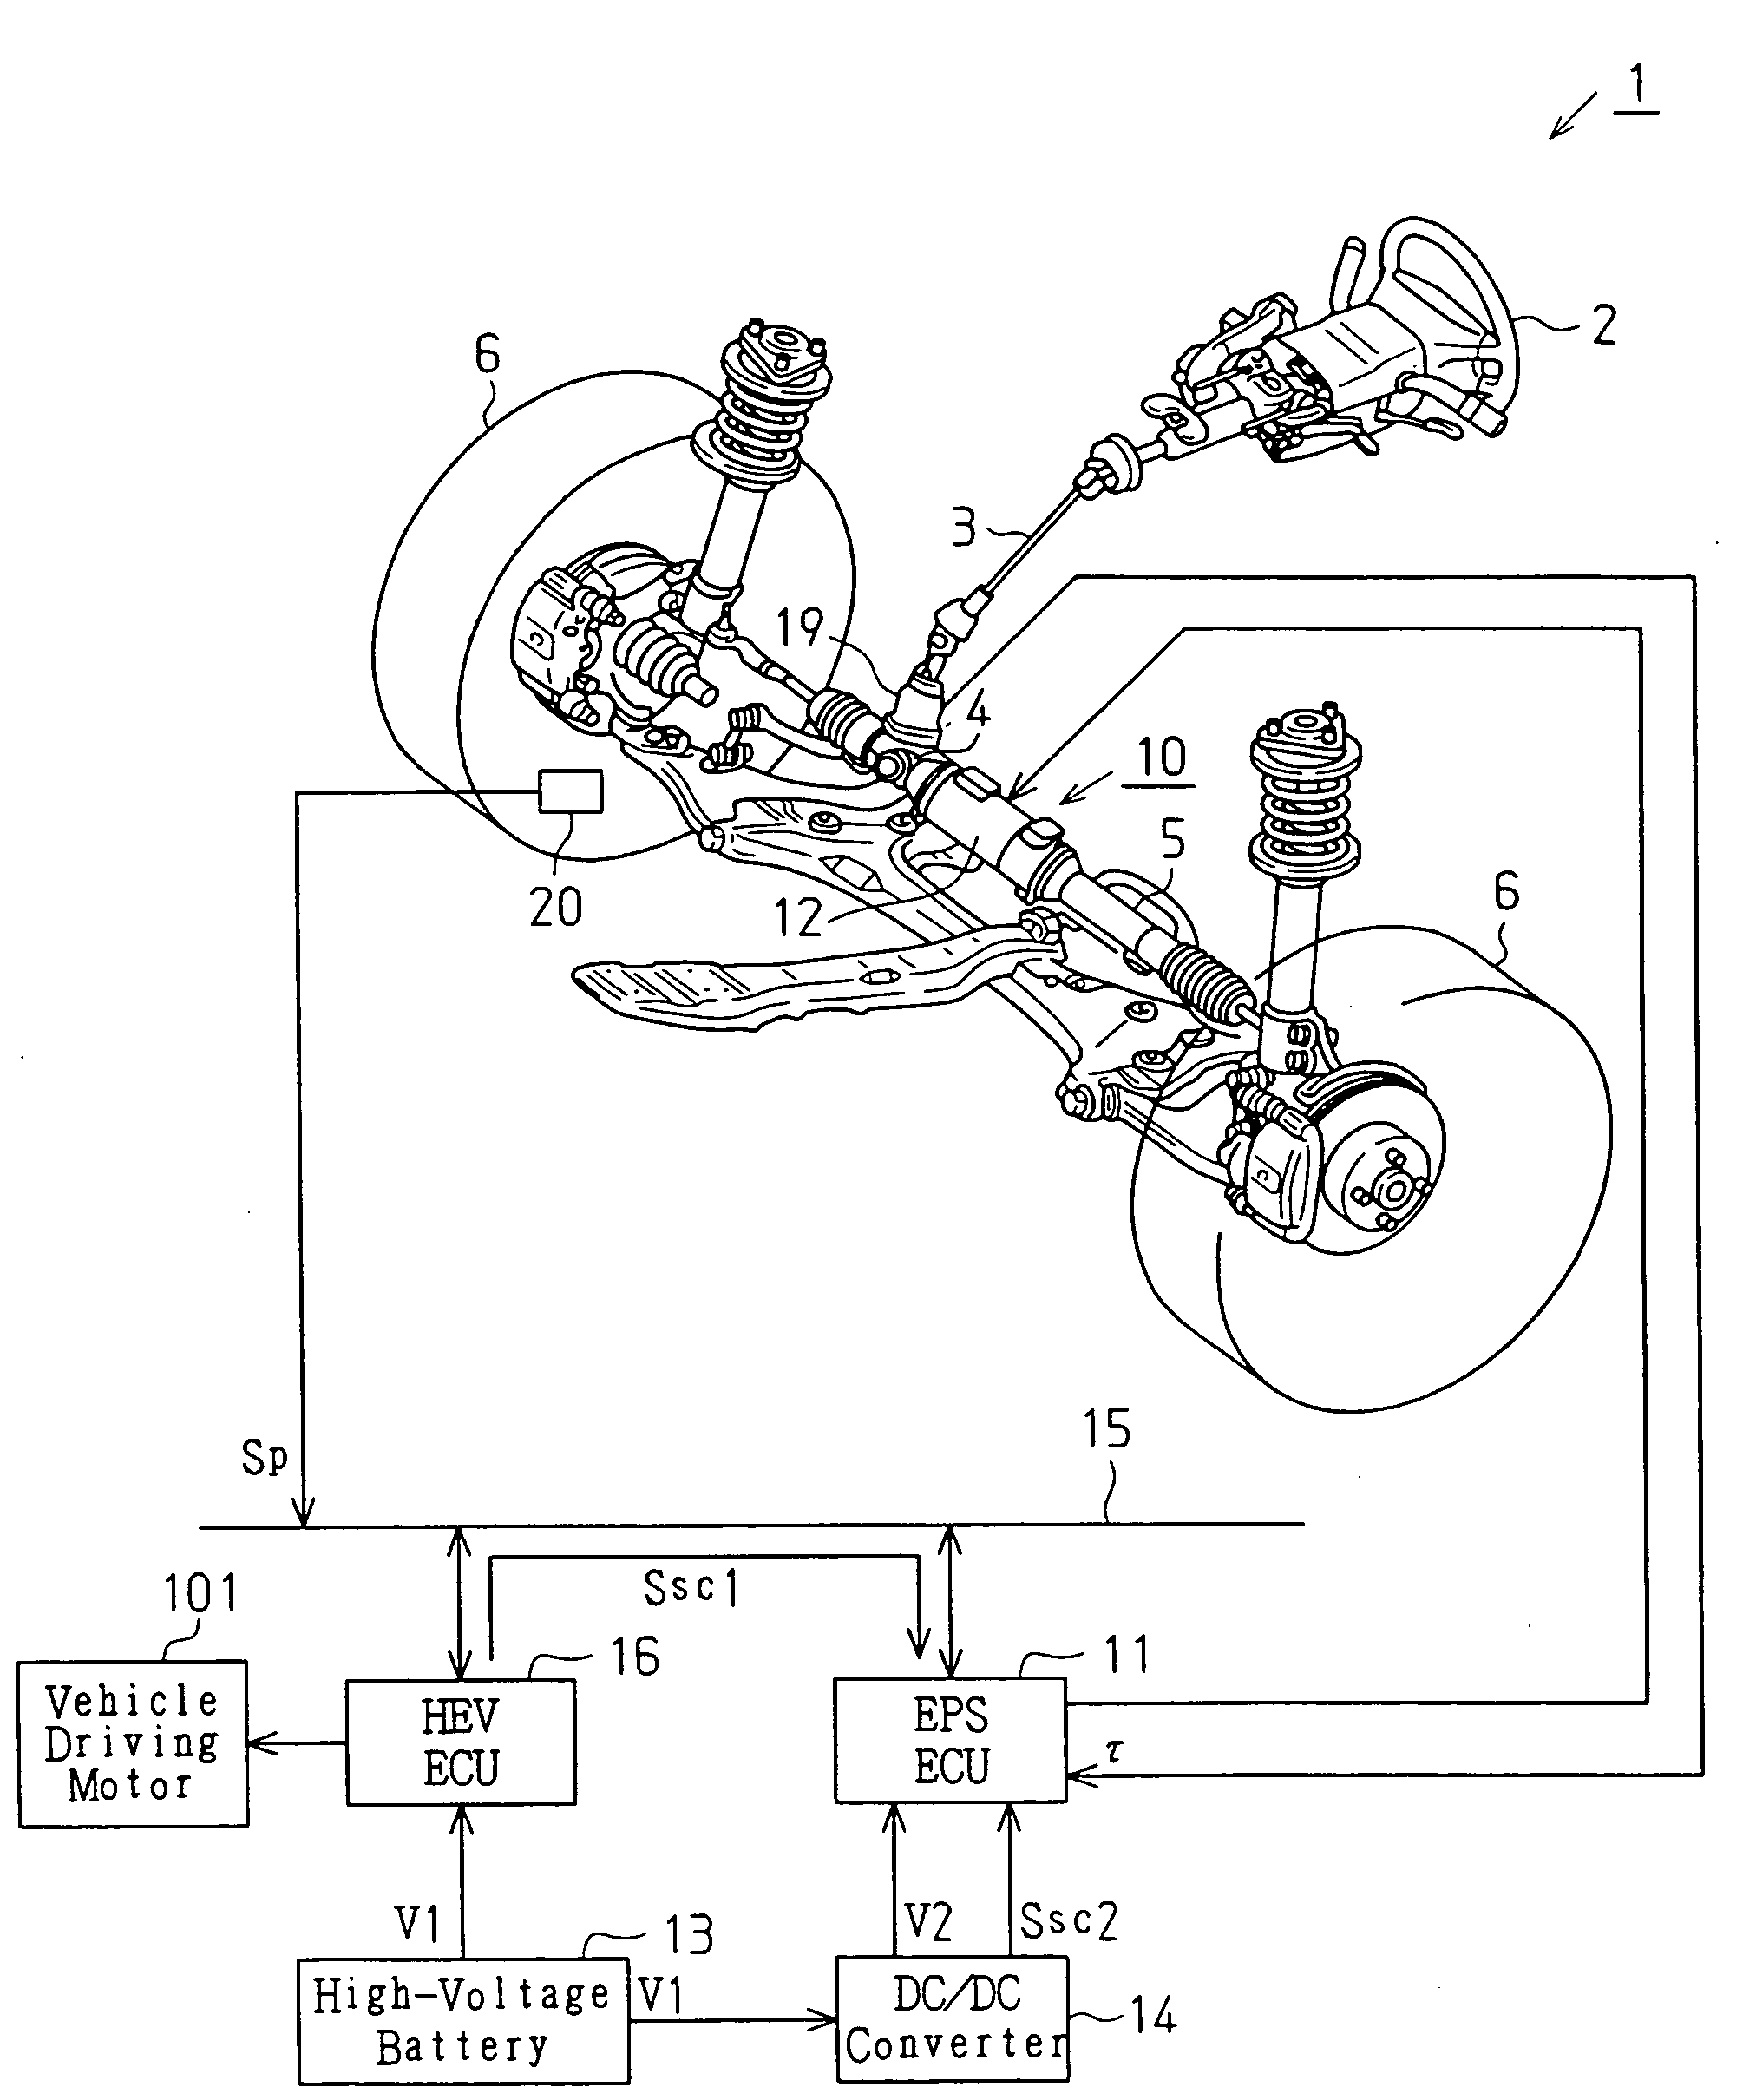 Electric power steering apparatus and electricity supply system